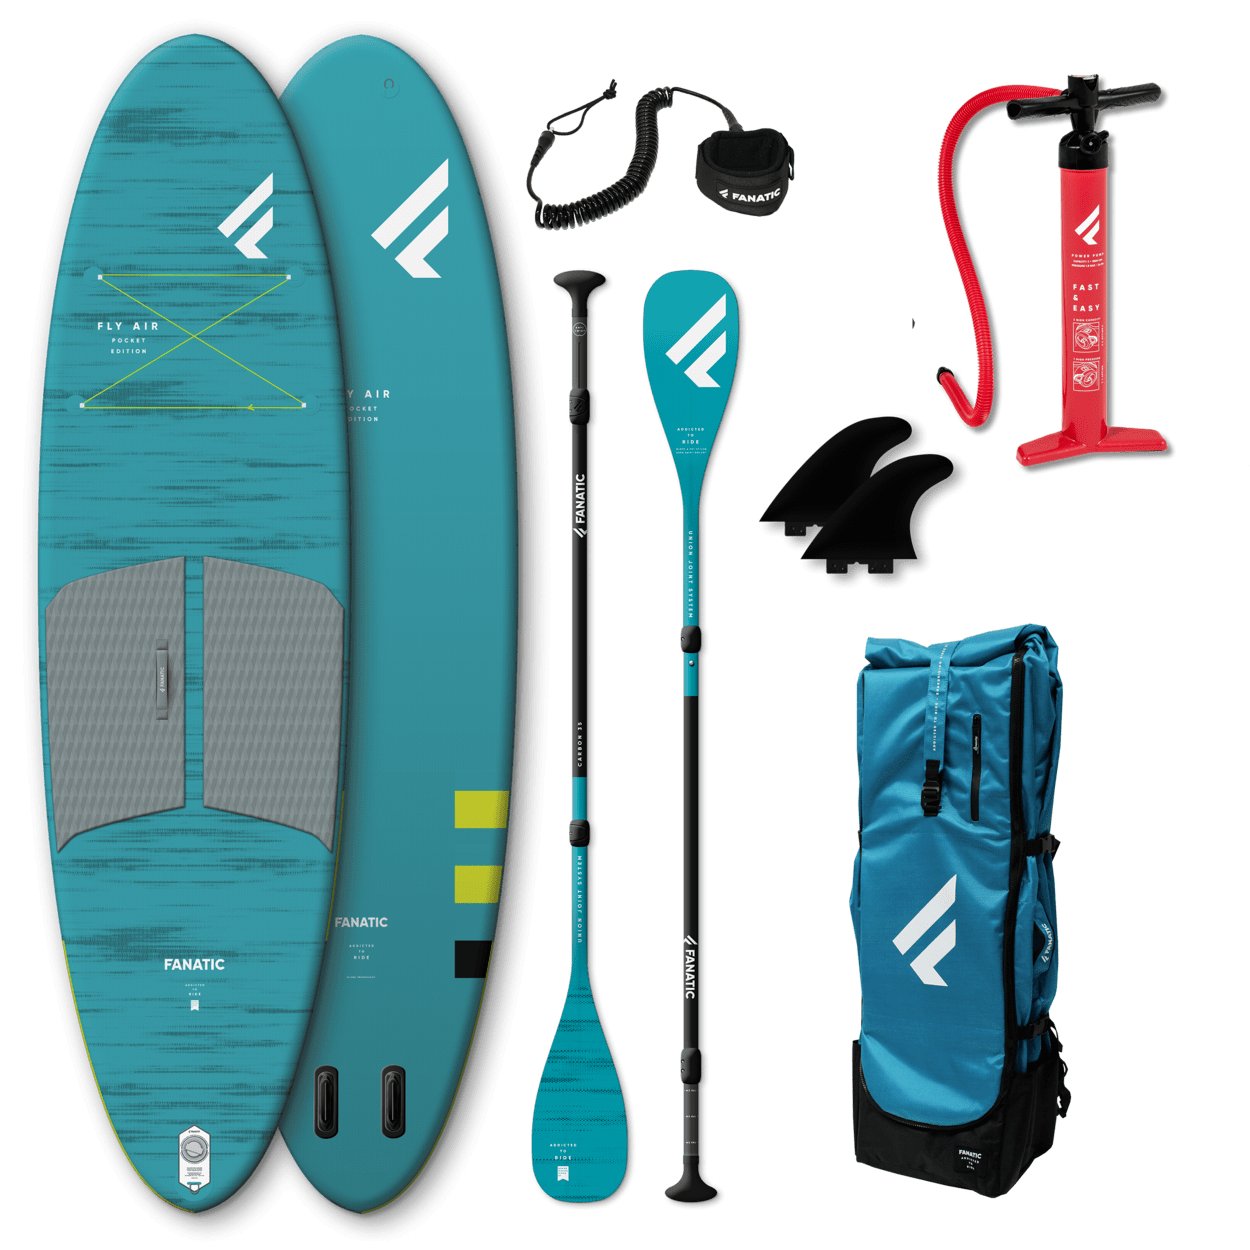 Fanatic Package Fly Air Pocket/C35 2022 iSUP Paddleboard - Worthing Watersports - 9010583004600 - iSUP Packages - Fanatic SUP